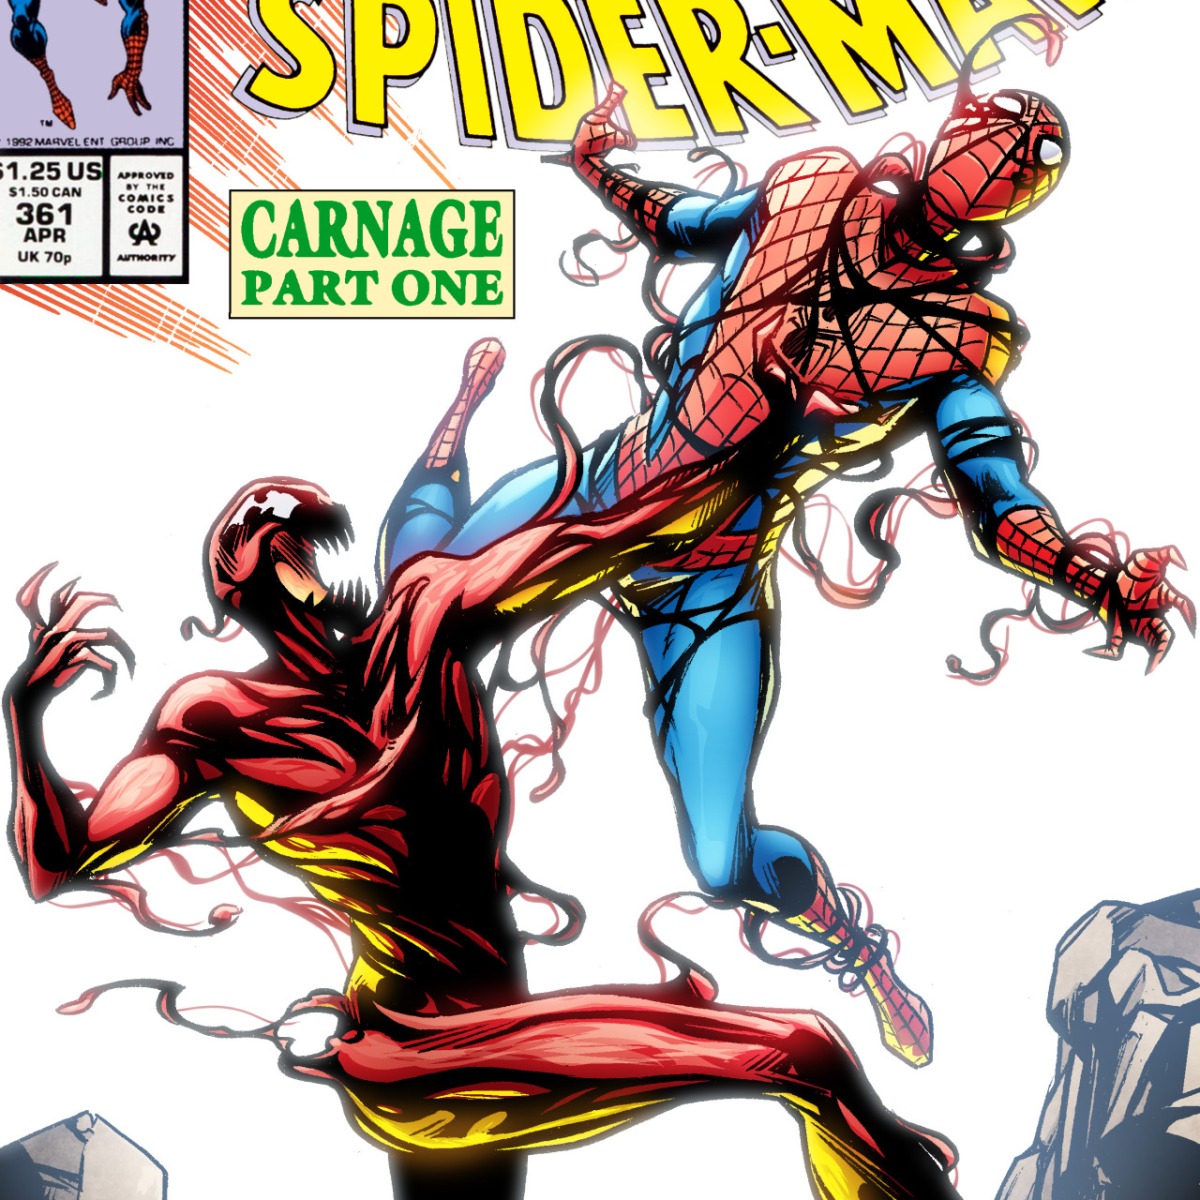 Carnage anniversary – Comic cover remake